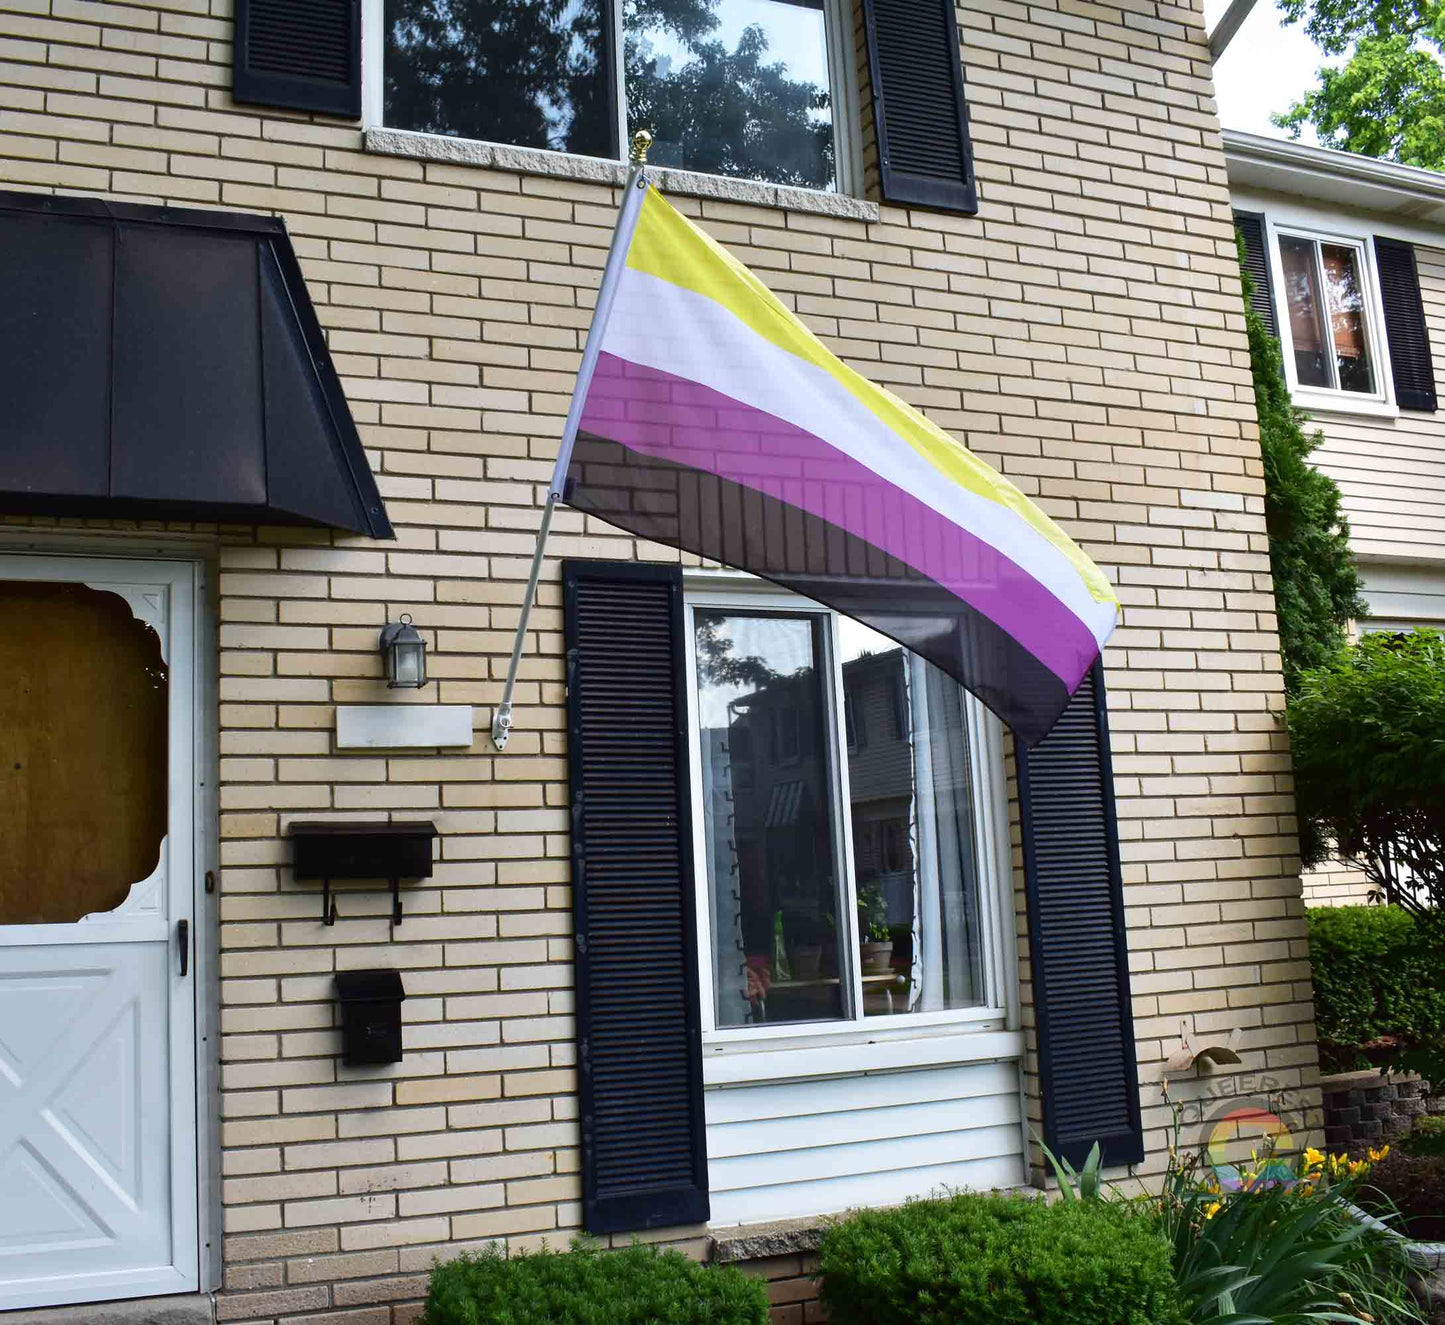 3’x5’ nonbinary pride flag hanging from a flagpole on the outside of a light brick house with dark shutters